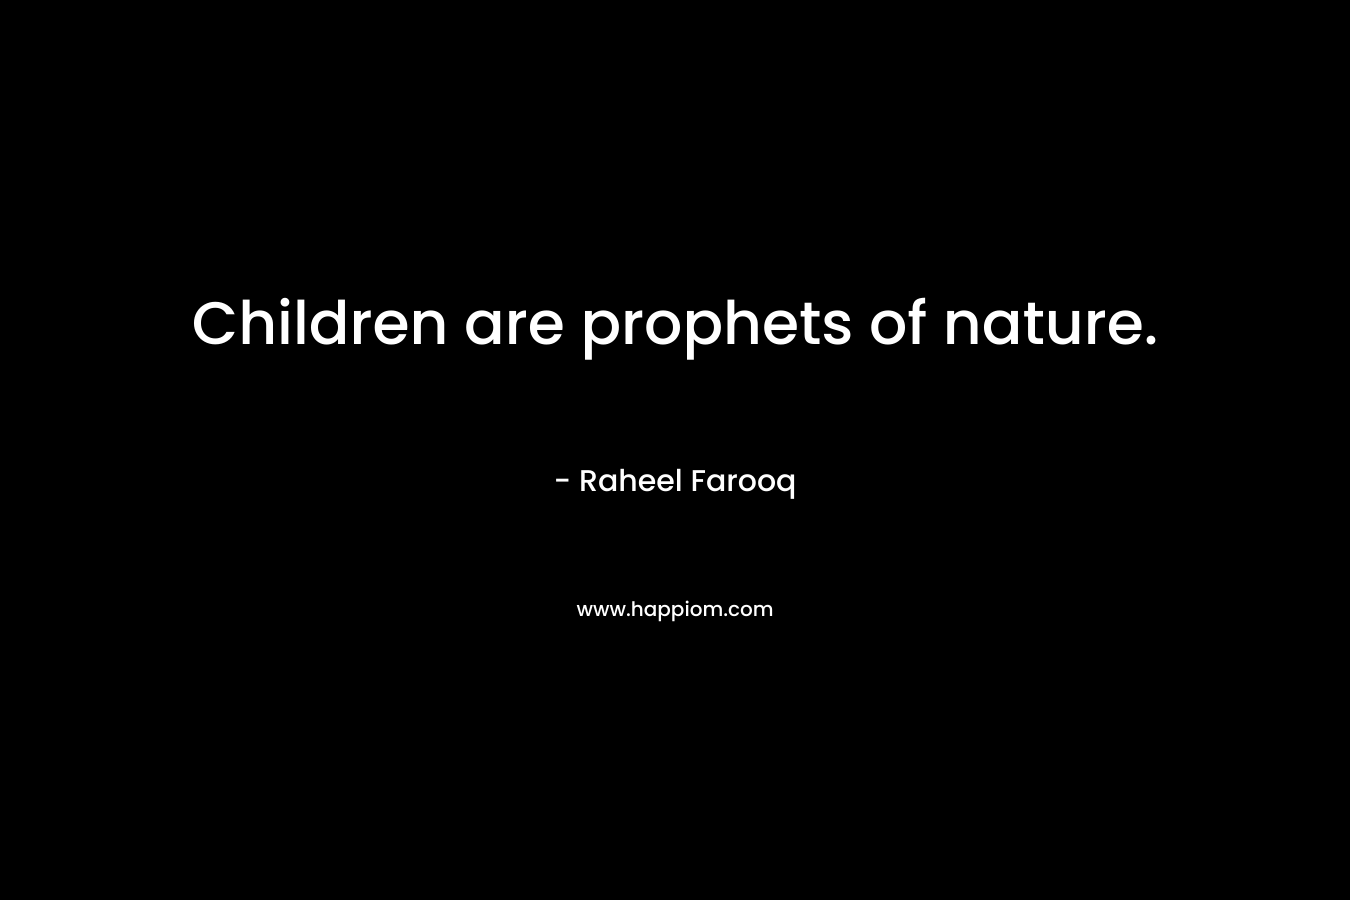 Children are prophets of nature.